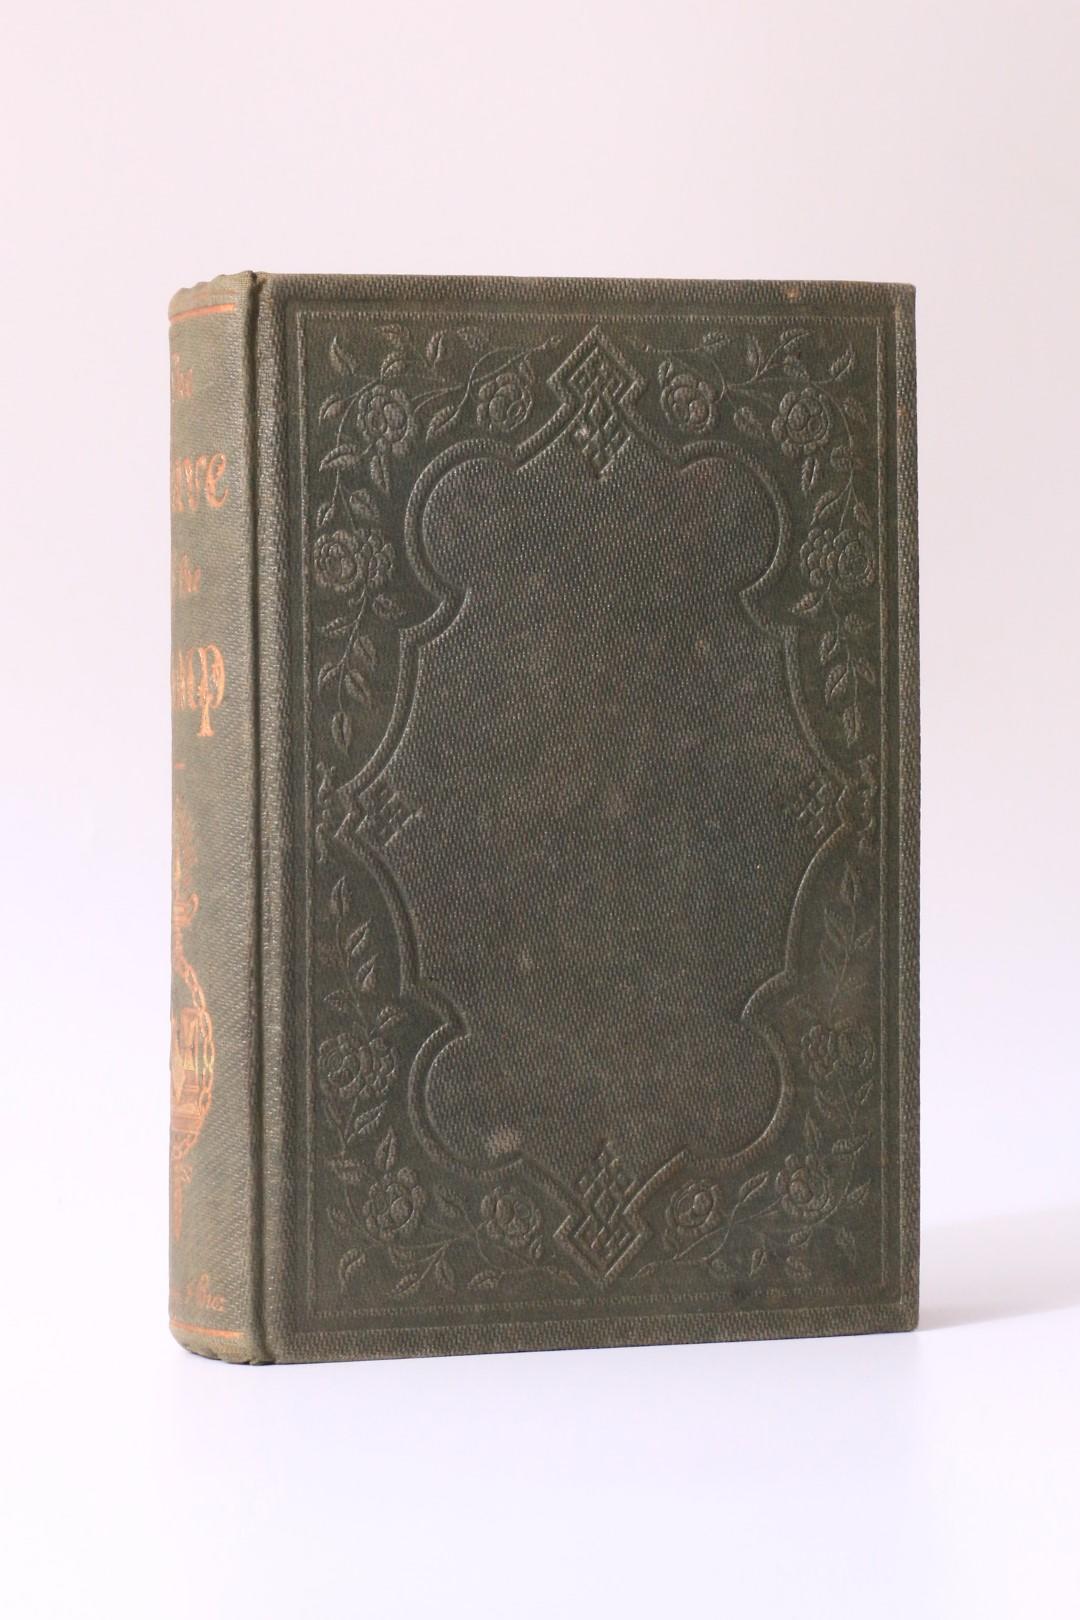 William North - The Slave of the Lamp. A Posthumous Novel - H. Long and Brother, 1855, First Edition.